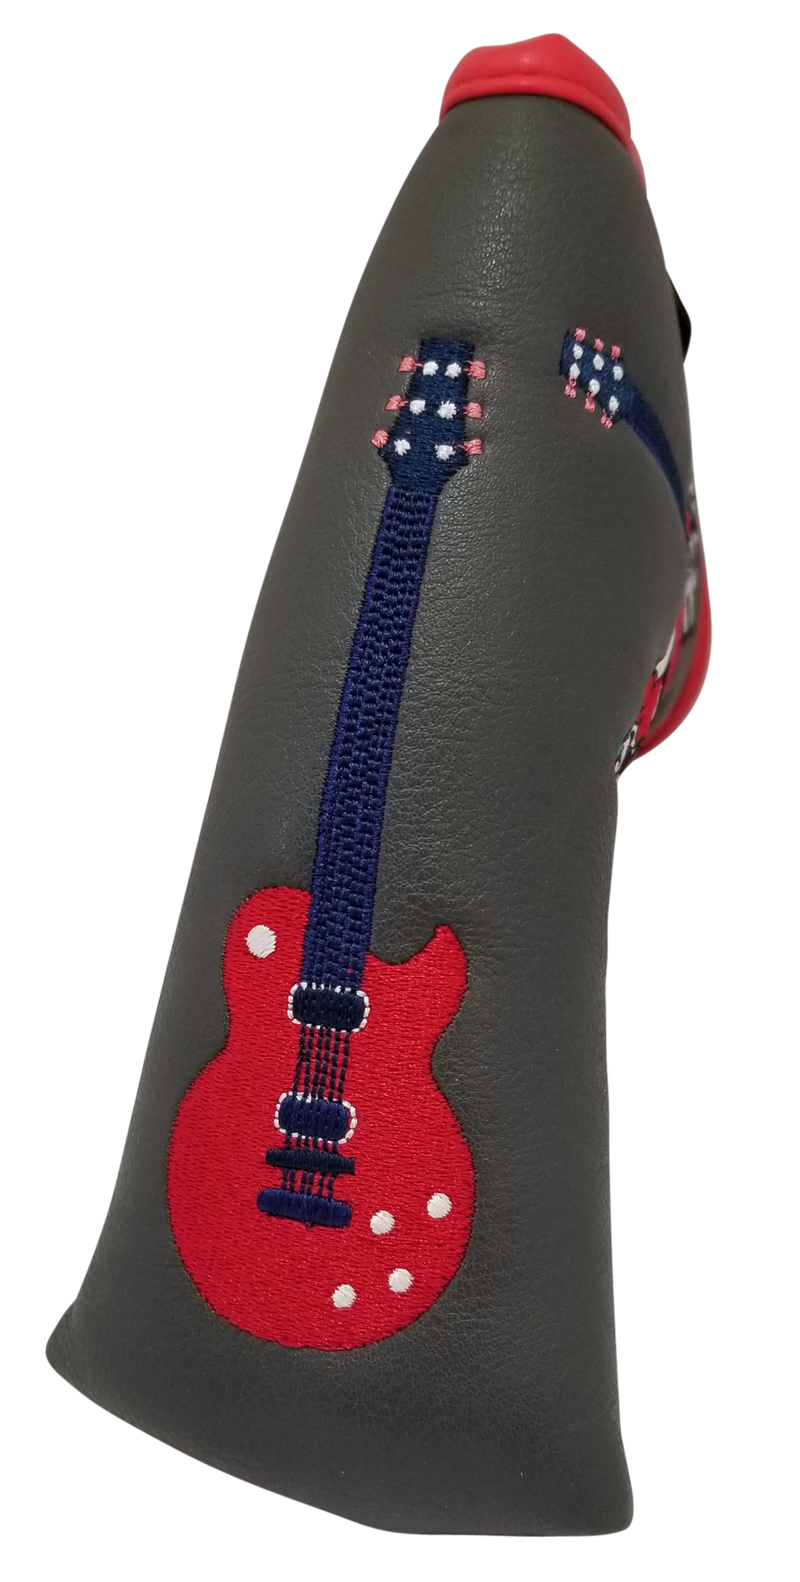 Rock 'N' Roll Embroidered Putter Cover - Blade by ReadyGOLF